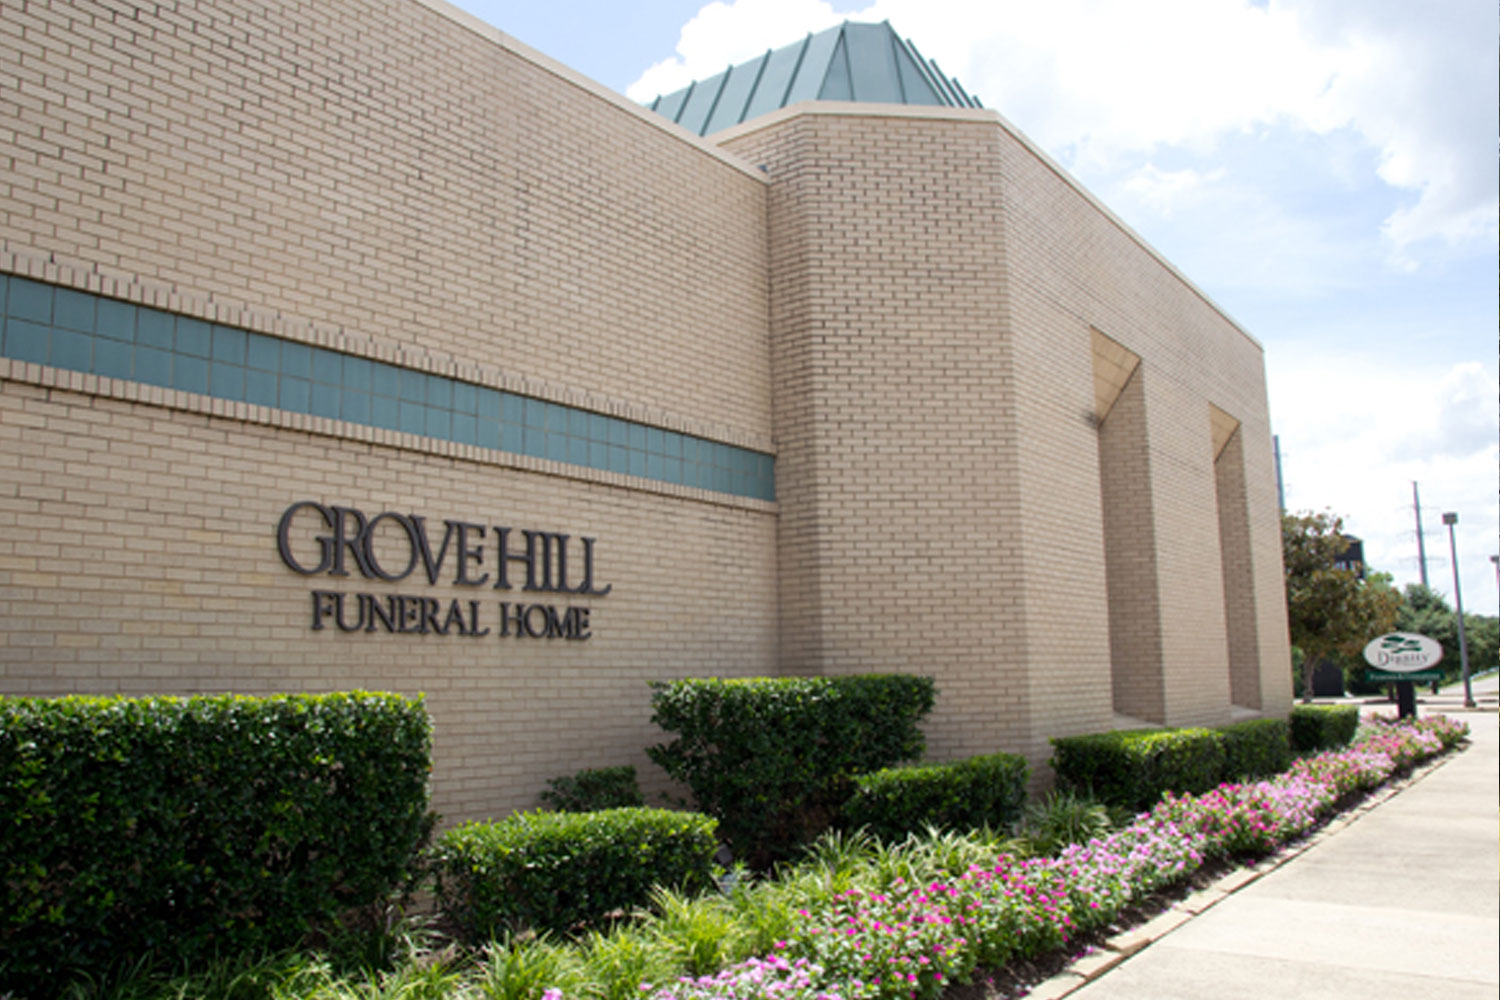 See prices, reviews, and photos of Grove Hill Funeral Home in Dallas, TX.